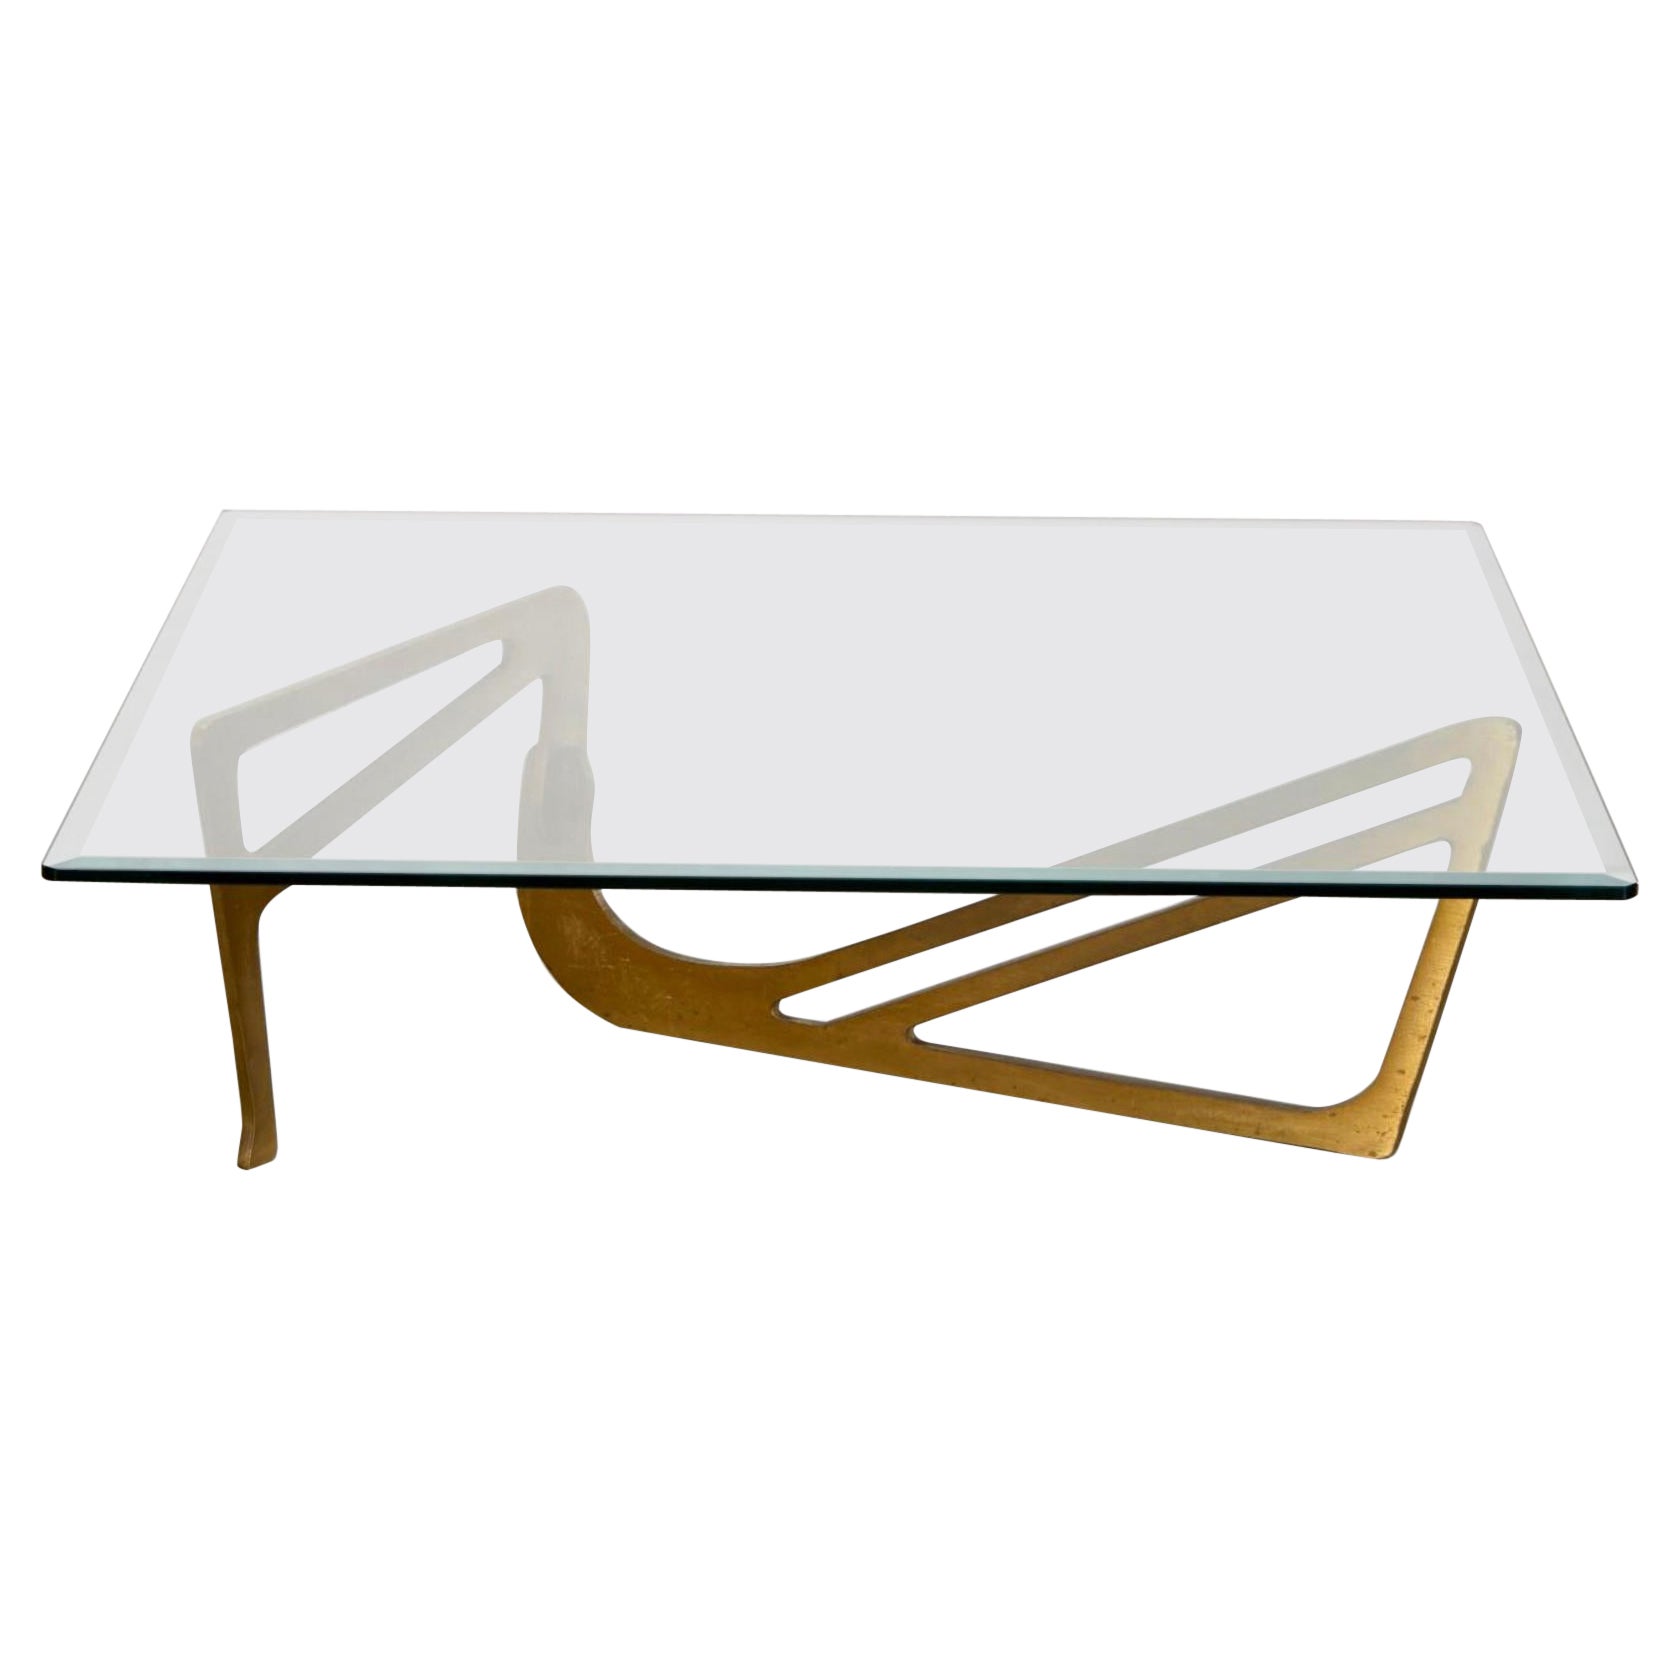 What type of glass is used for coffee tables?